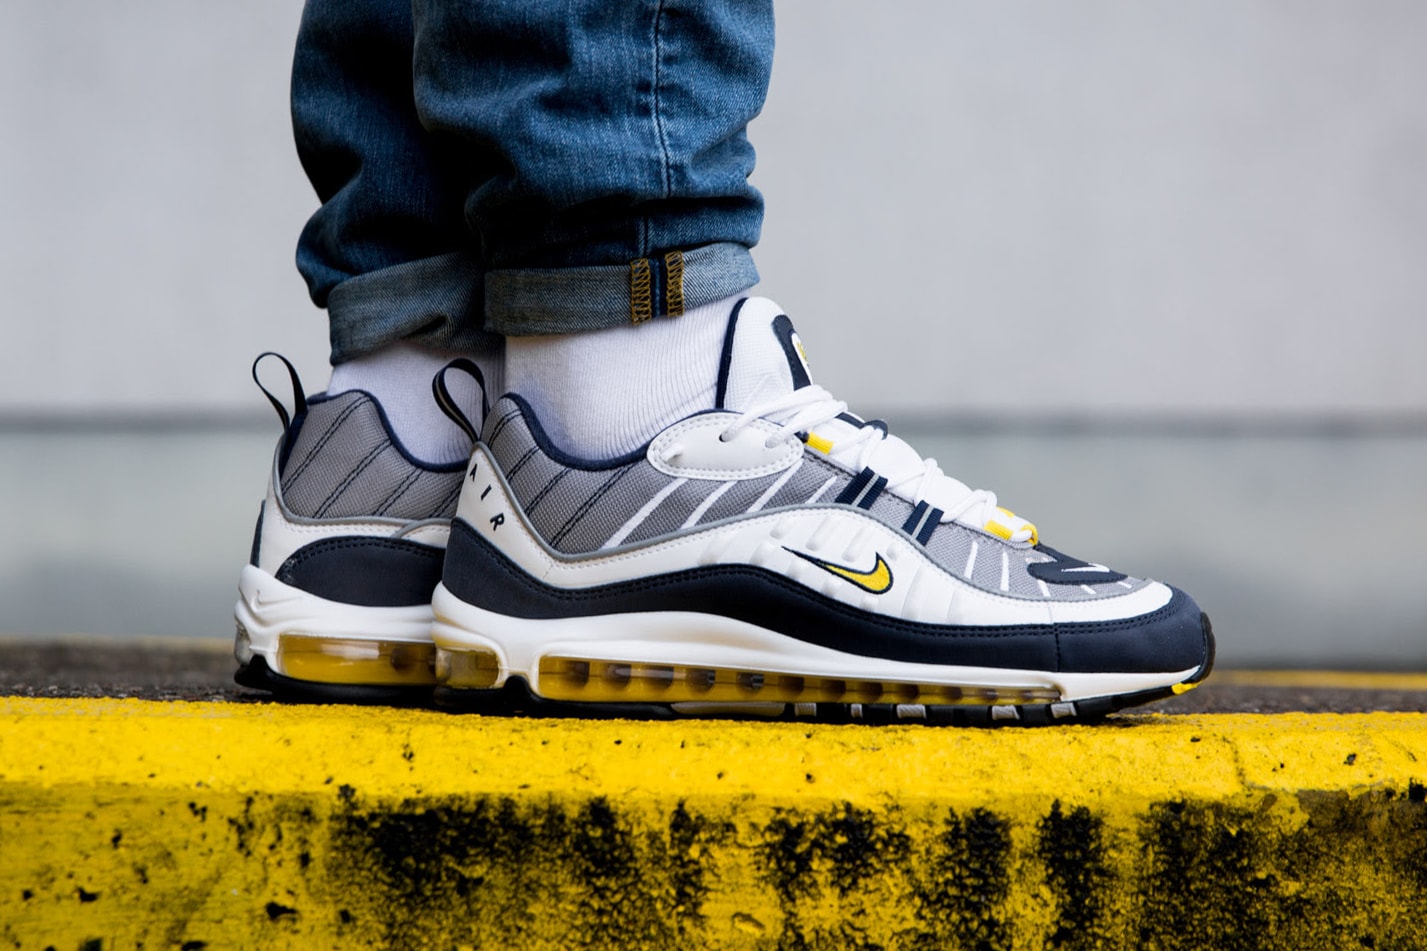 Nike Air Max 98 Gundam Tour Yellow Footwear Sneakers Shoes On Feet Closer Look Release Date Info Drops January 26 2018